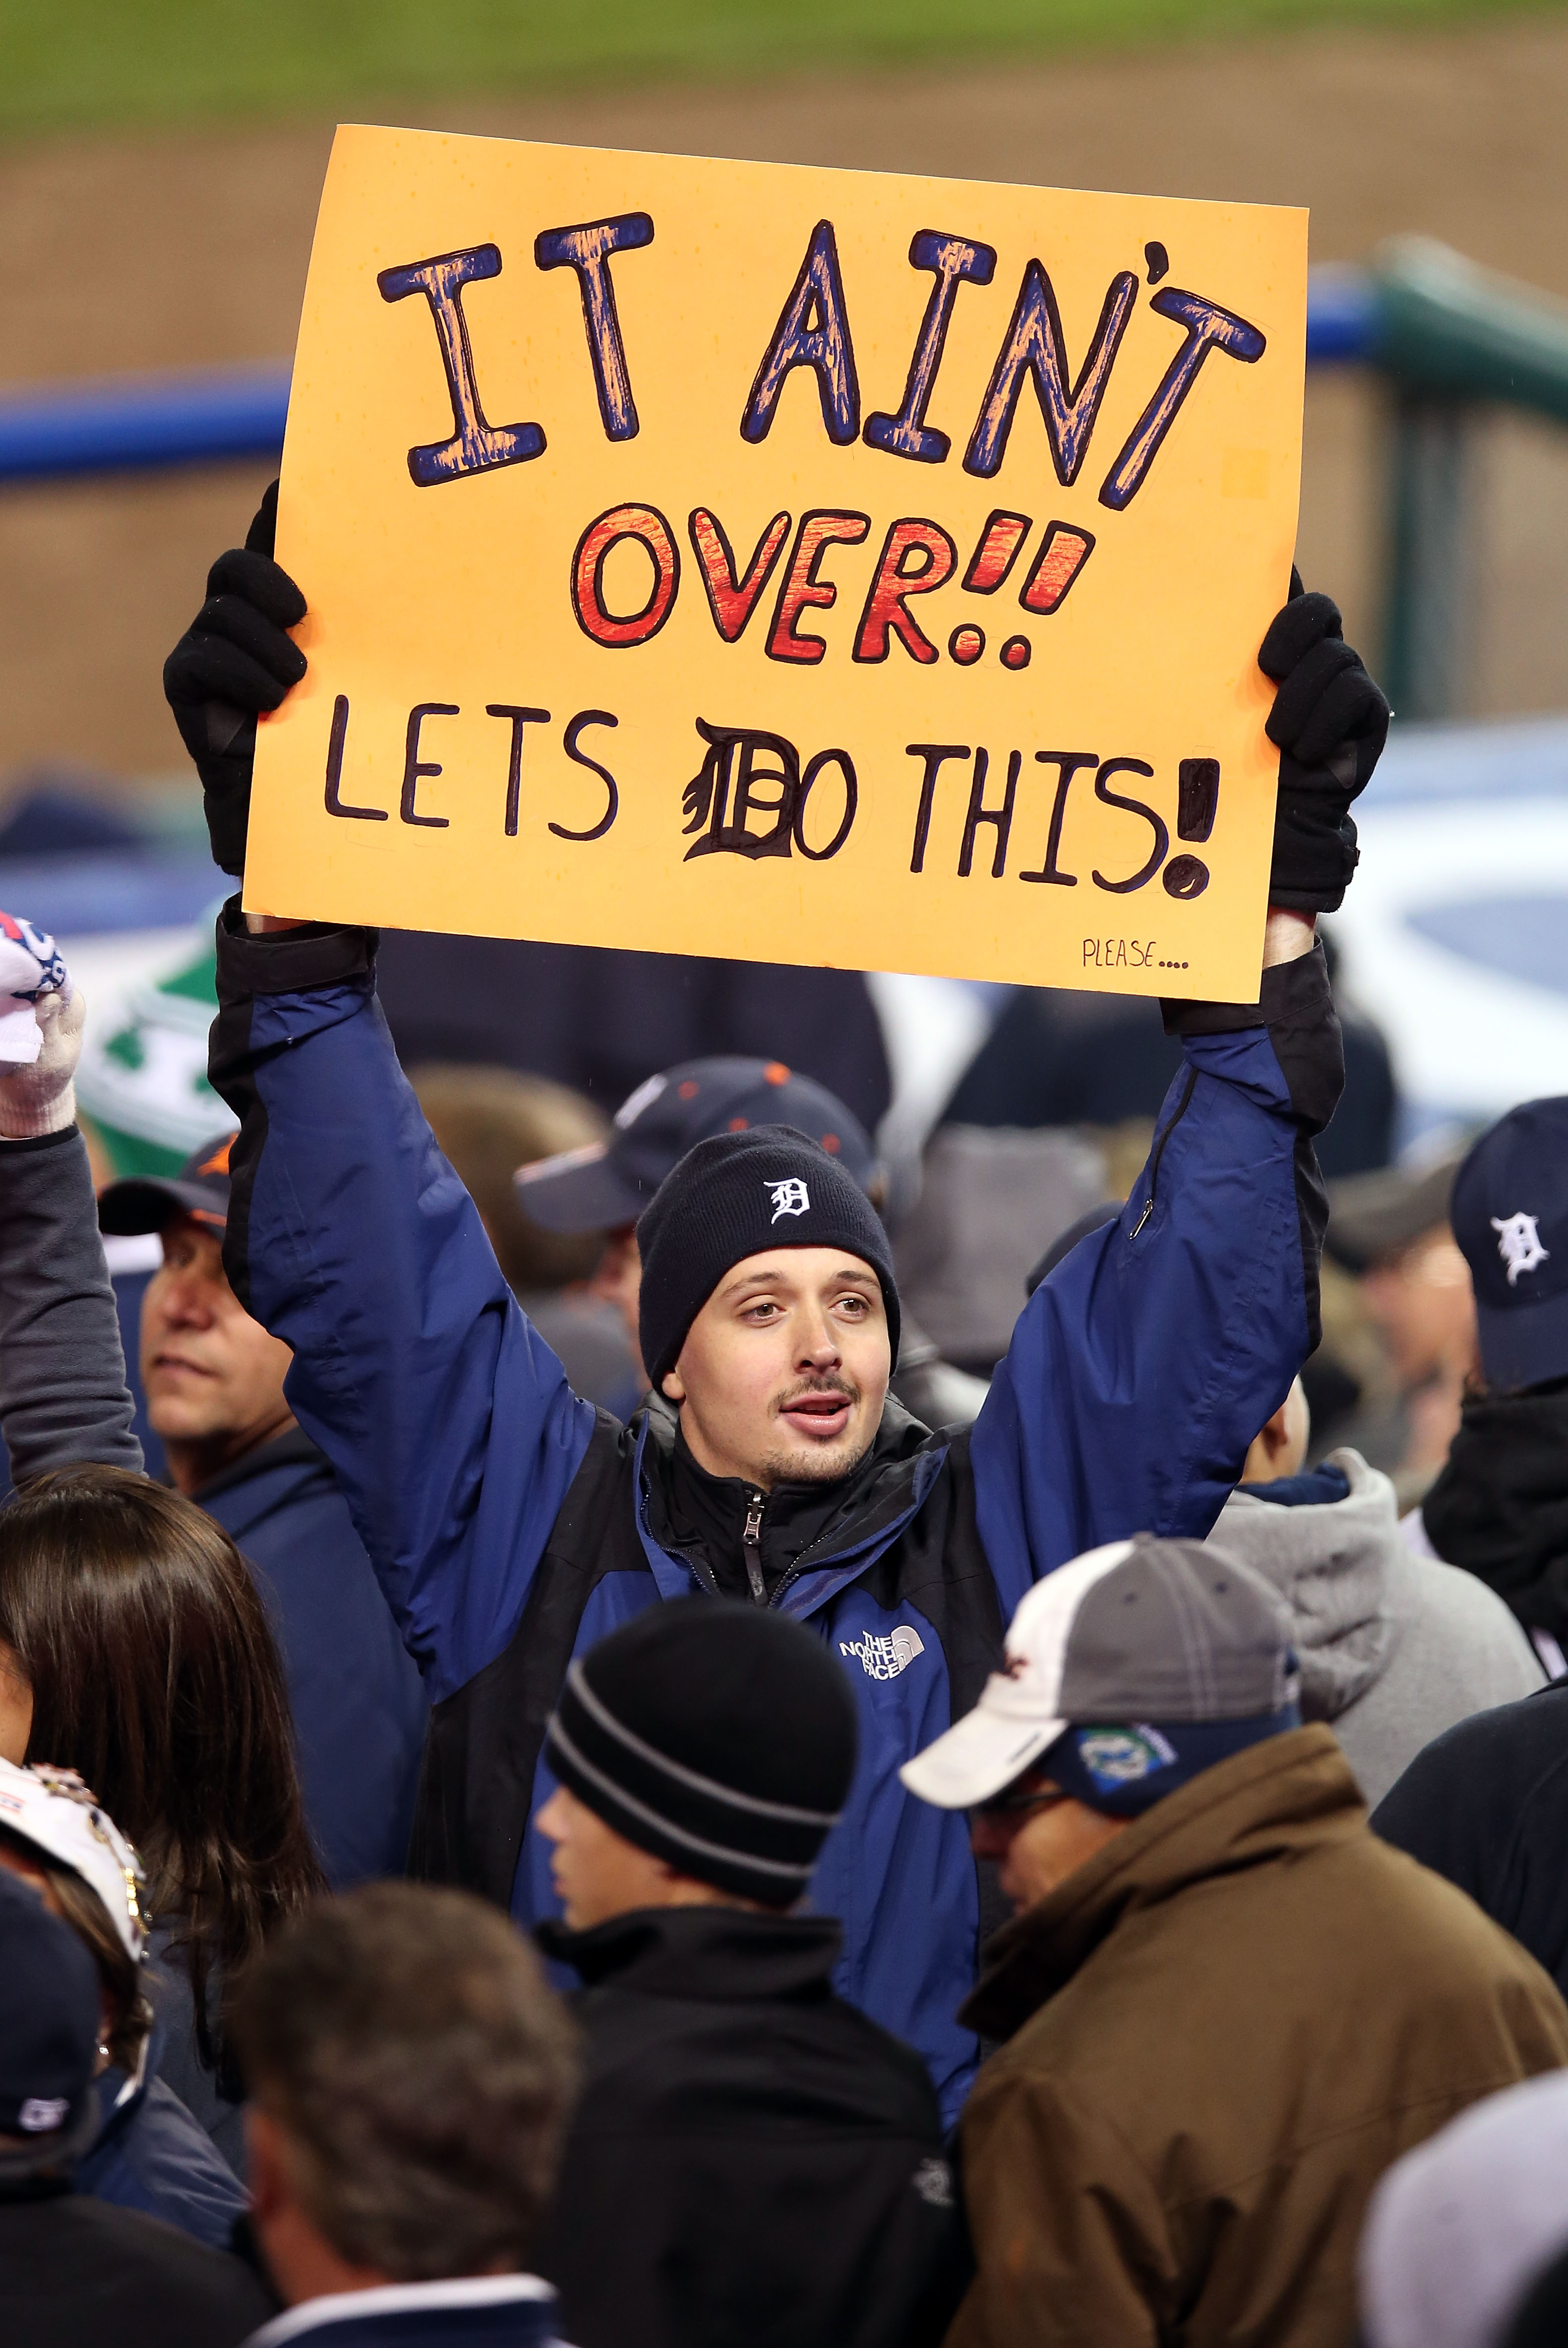 Tickets For Potential World Series Games At Comerica Park Go On Sale Tomorrow – CBS Detroit